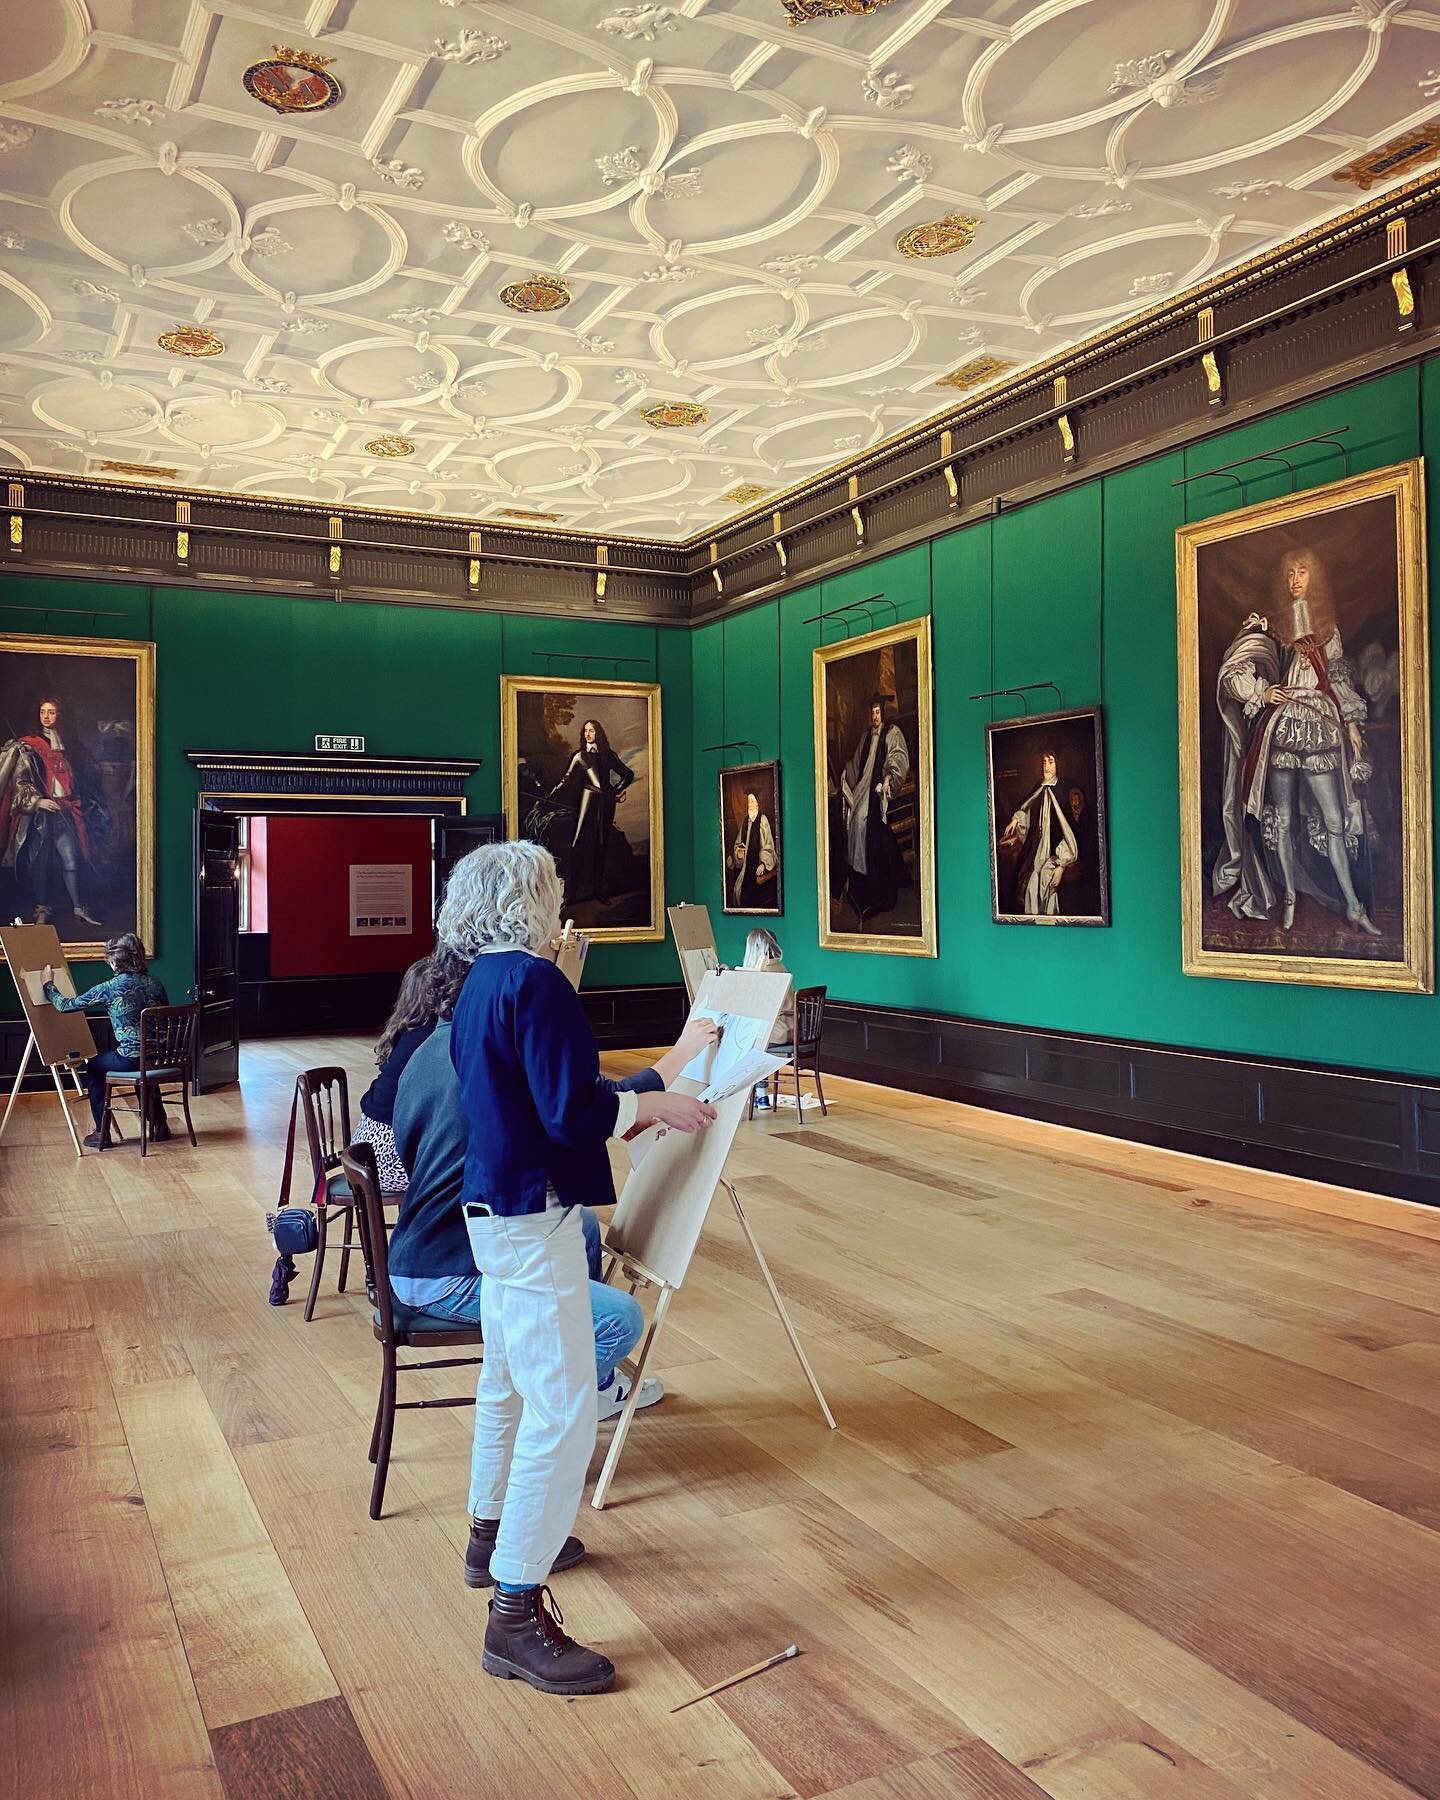 A great day drawing in the magnificent Tudor Chamber at the Charterhouse Museum which houses a number of flamboyant, full-length theatrical portraits from the Restoration. Perfect material for some irreverent &lsquo;exquisite corpse&rsquo; drawings a